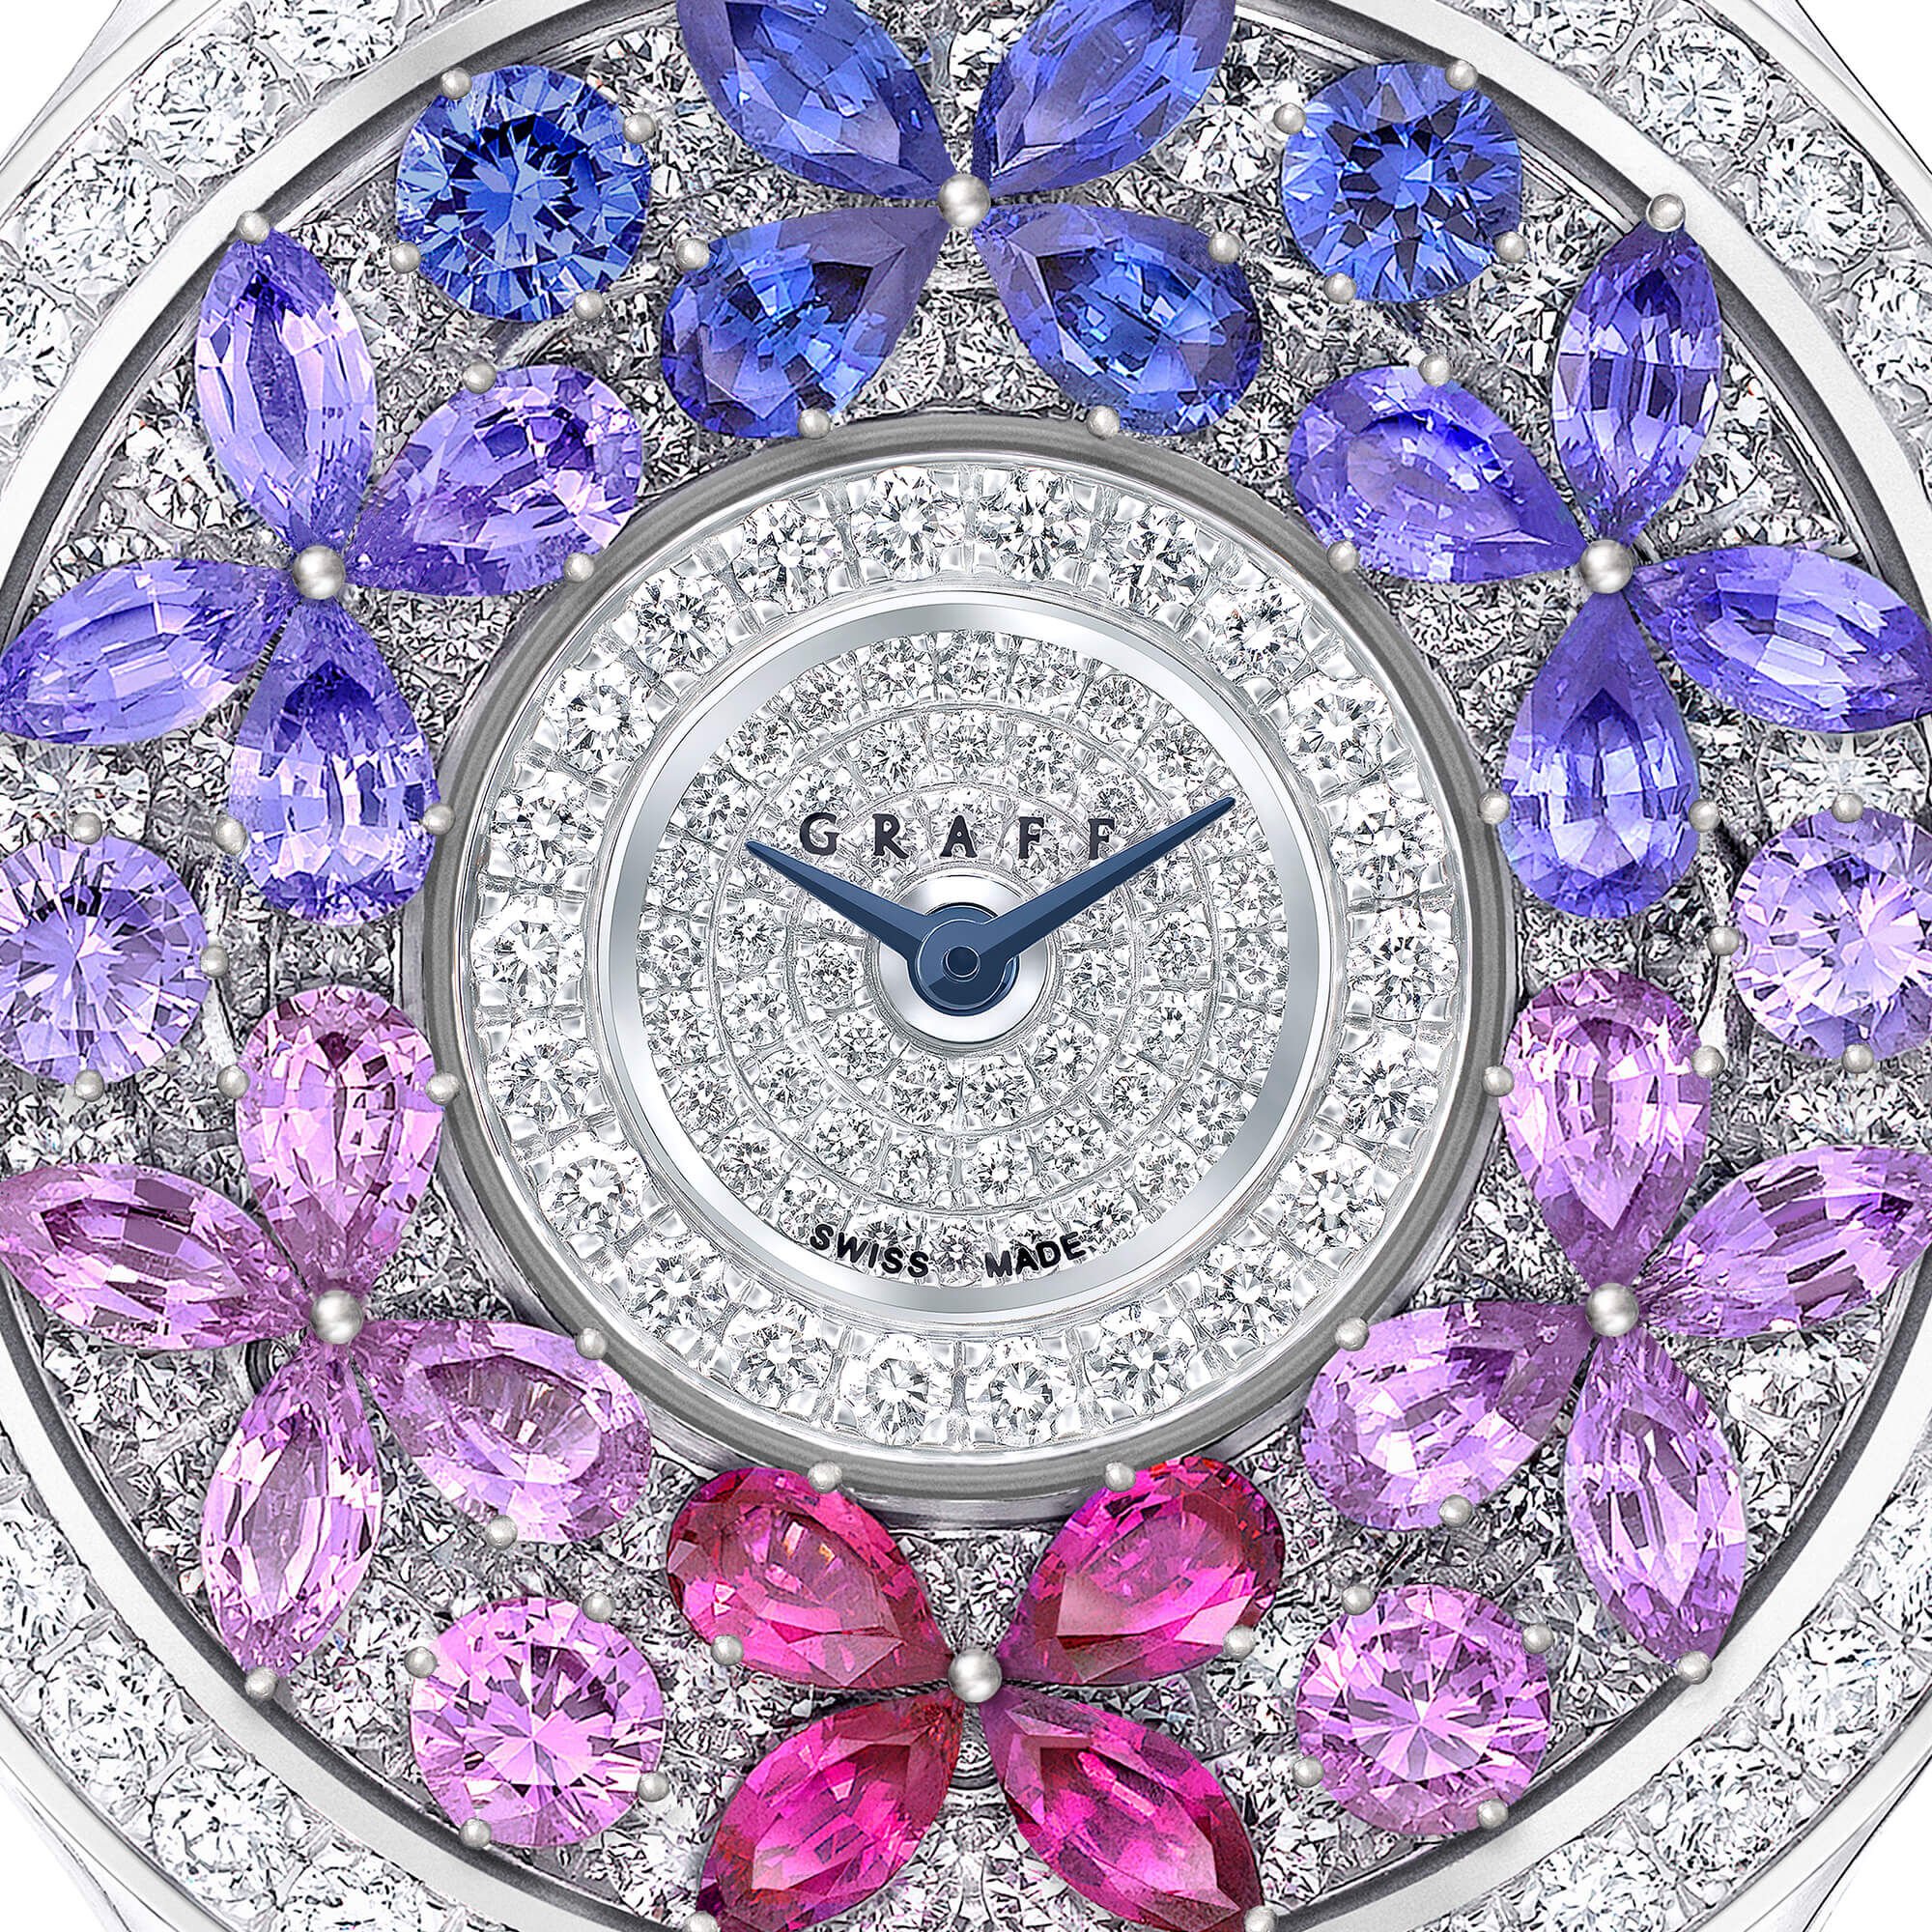 Close up of a Graff Rainbow Sapphire and diamonds butterfly watch from the Graff Butterfly Ladies' Watch collection.